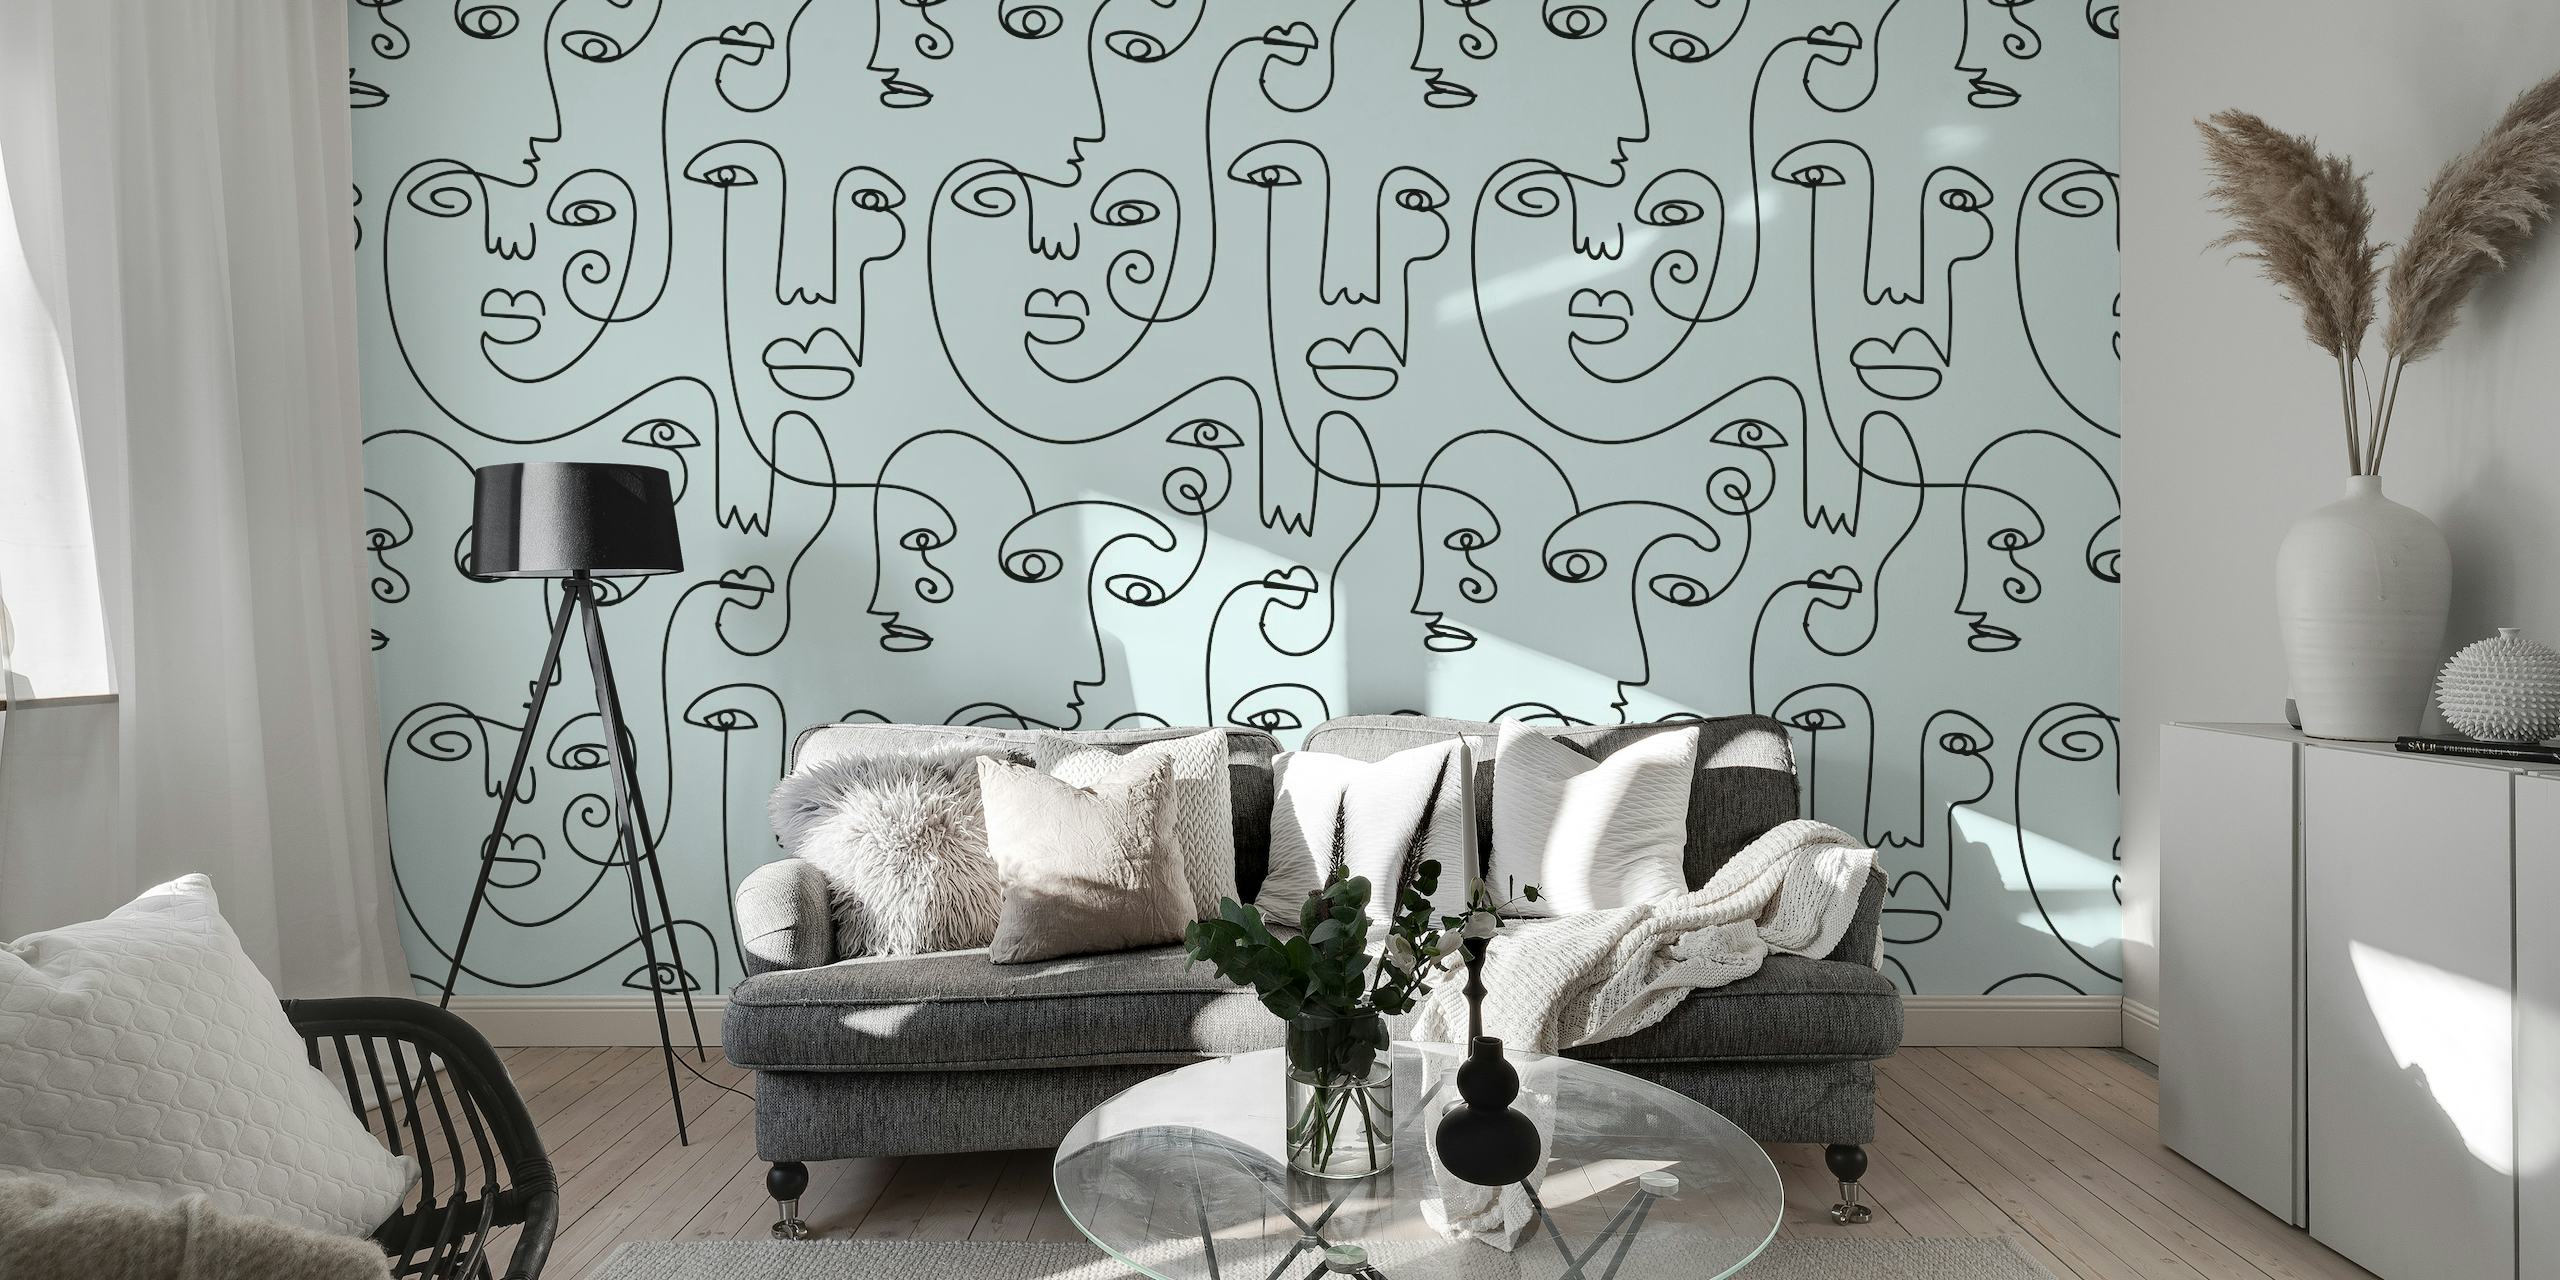 Abstract Picasso-inspired line art featuring female silhouettes in a continuous pattern on a wall mural